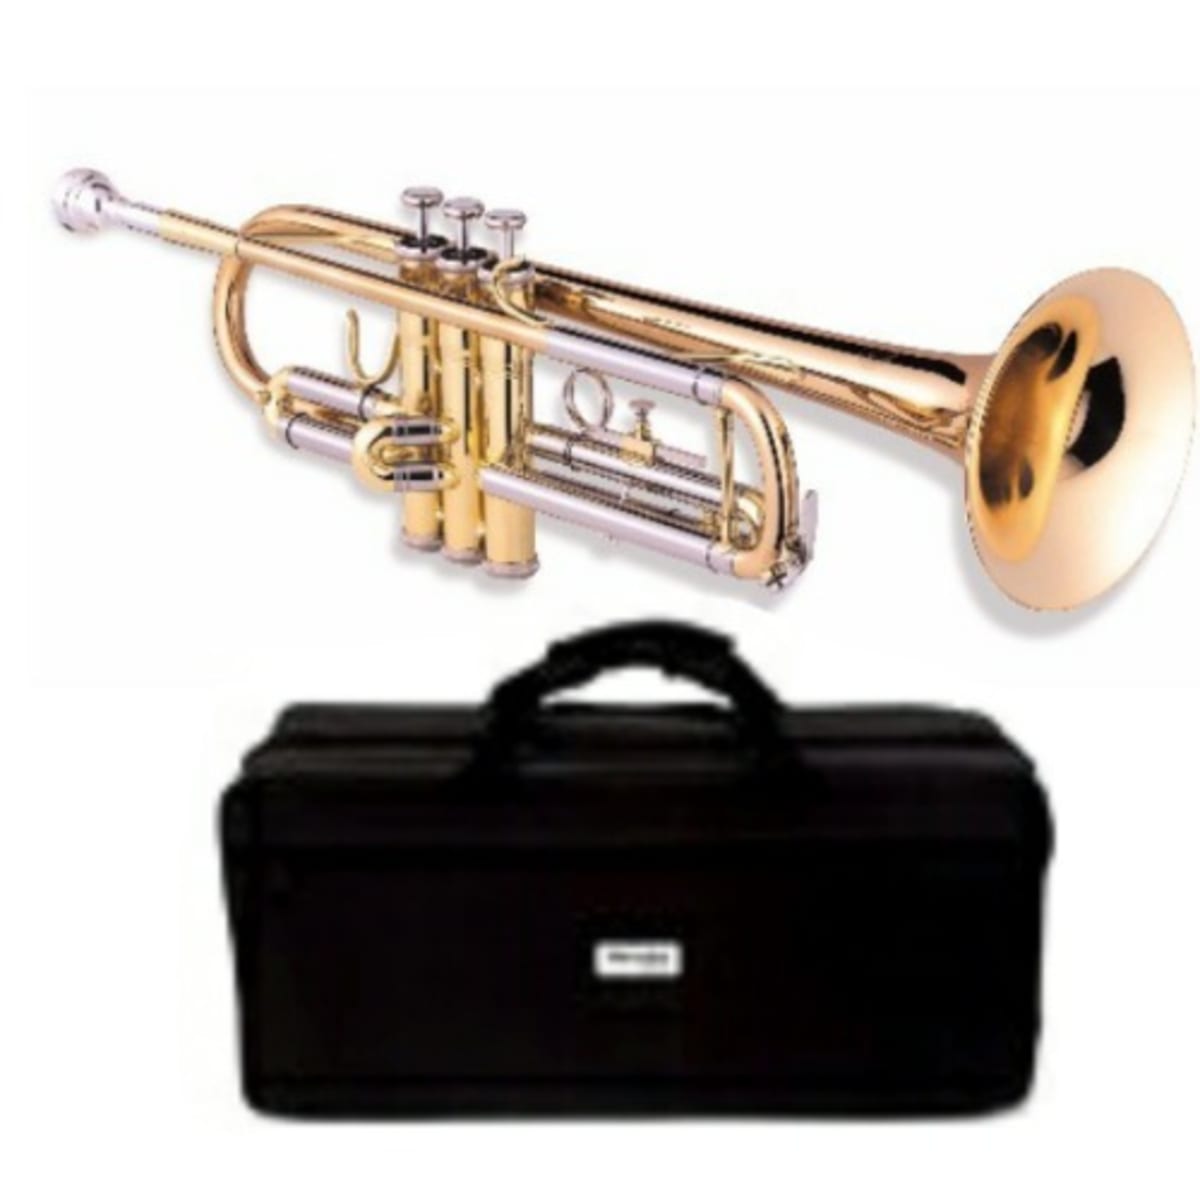 Yamaha Professional Trumpet with Accessories - Gold